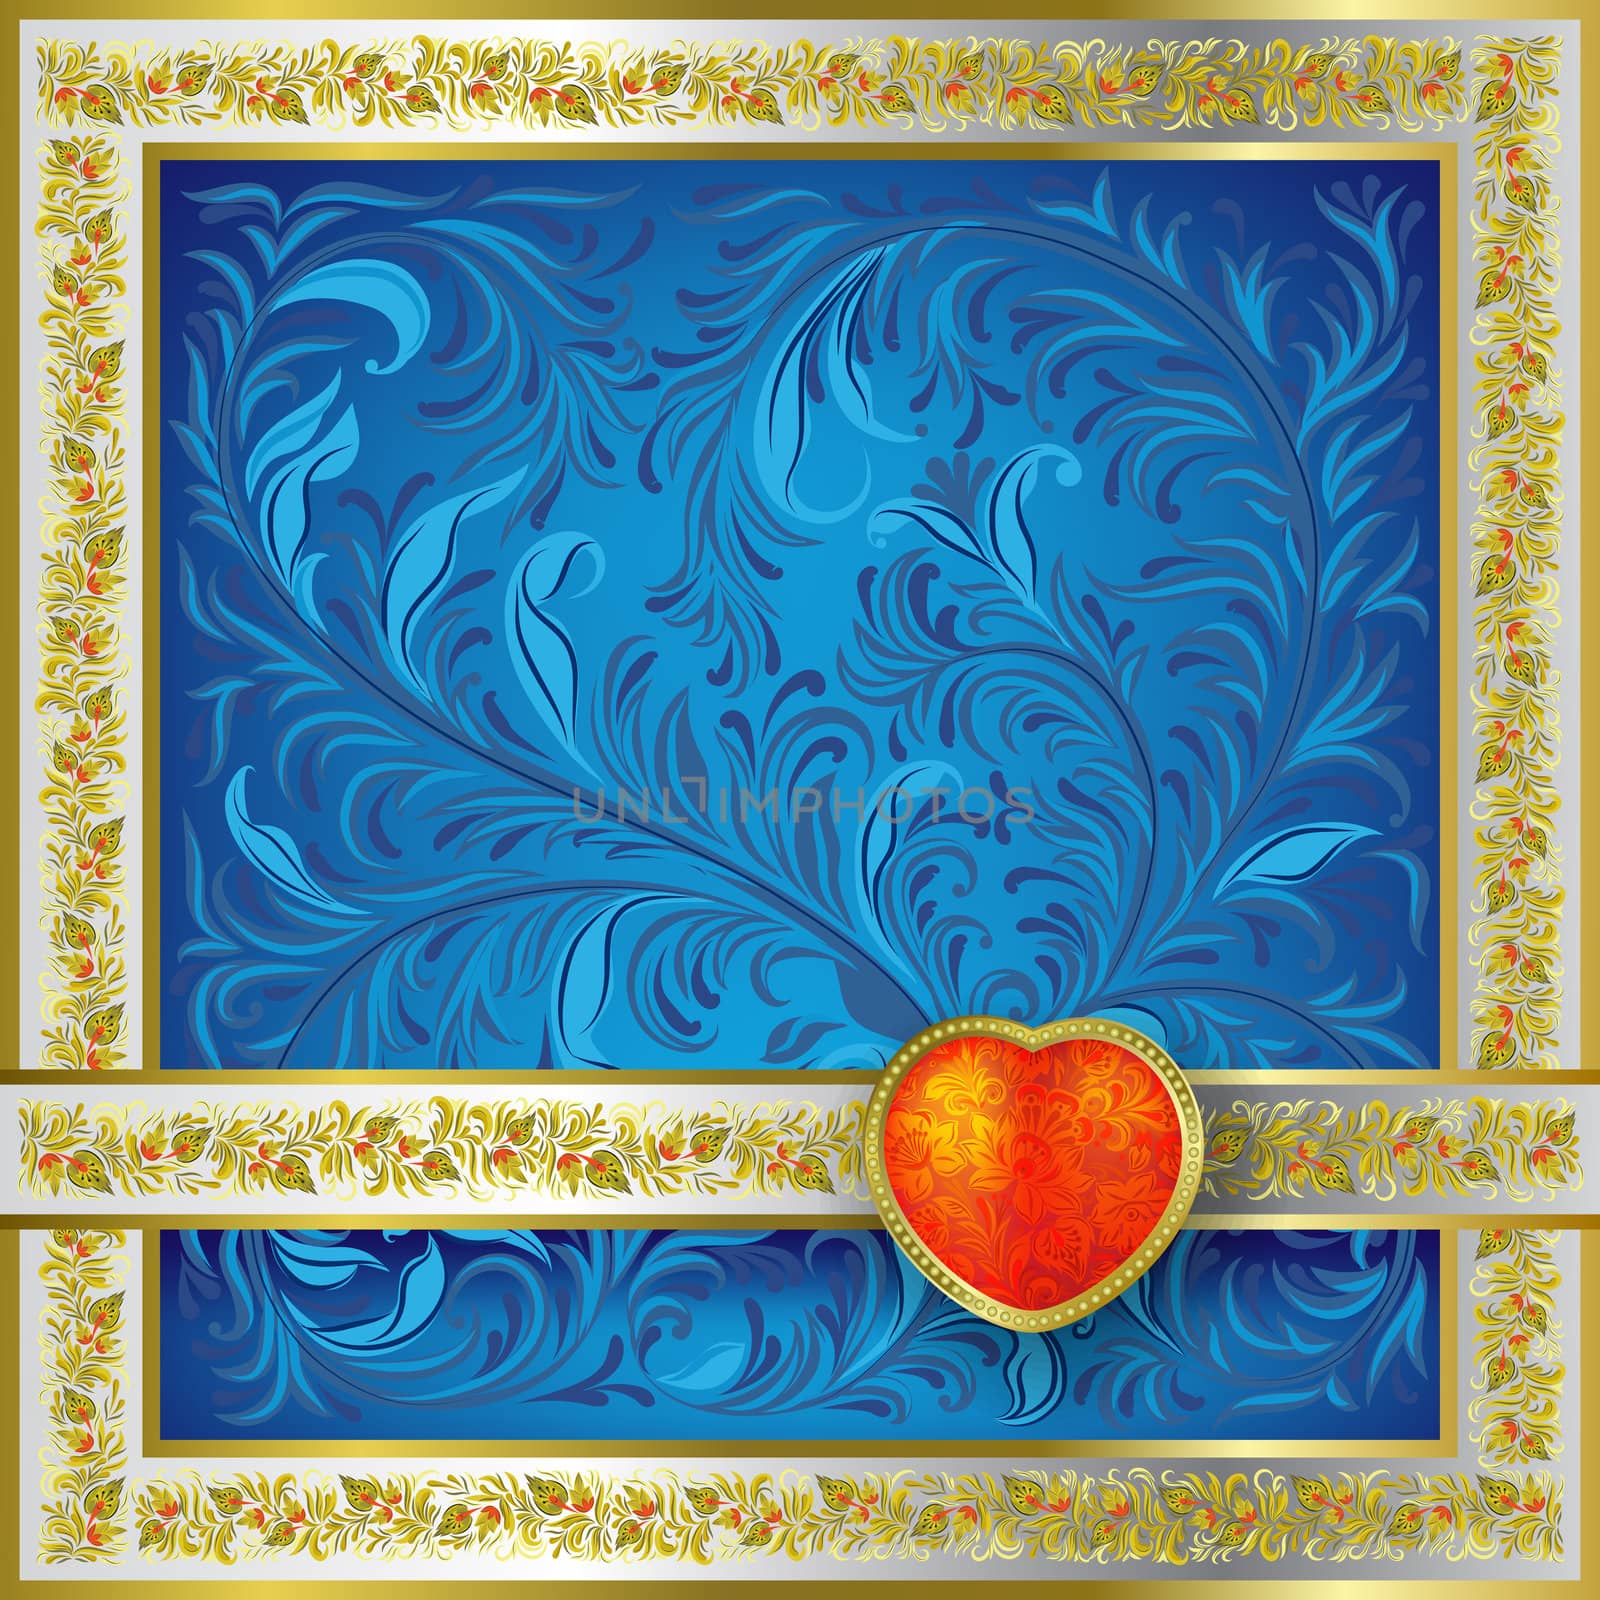 Valentines blue greeting with red heart and gold floral frame